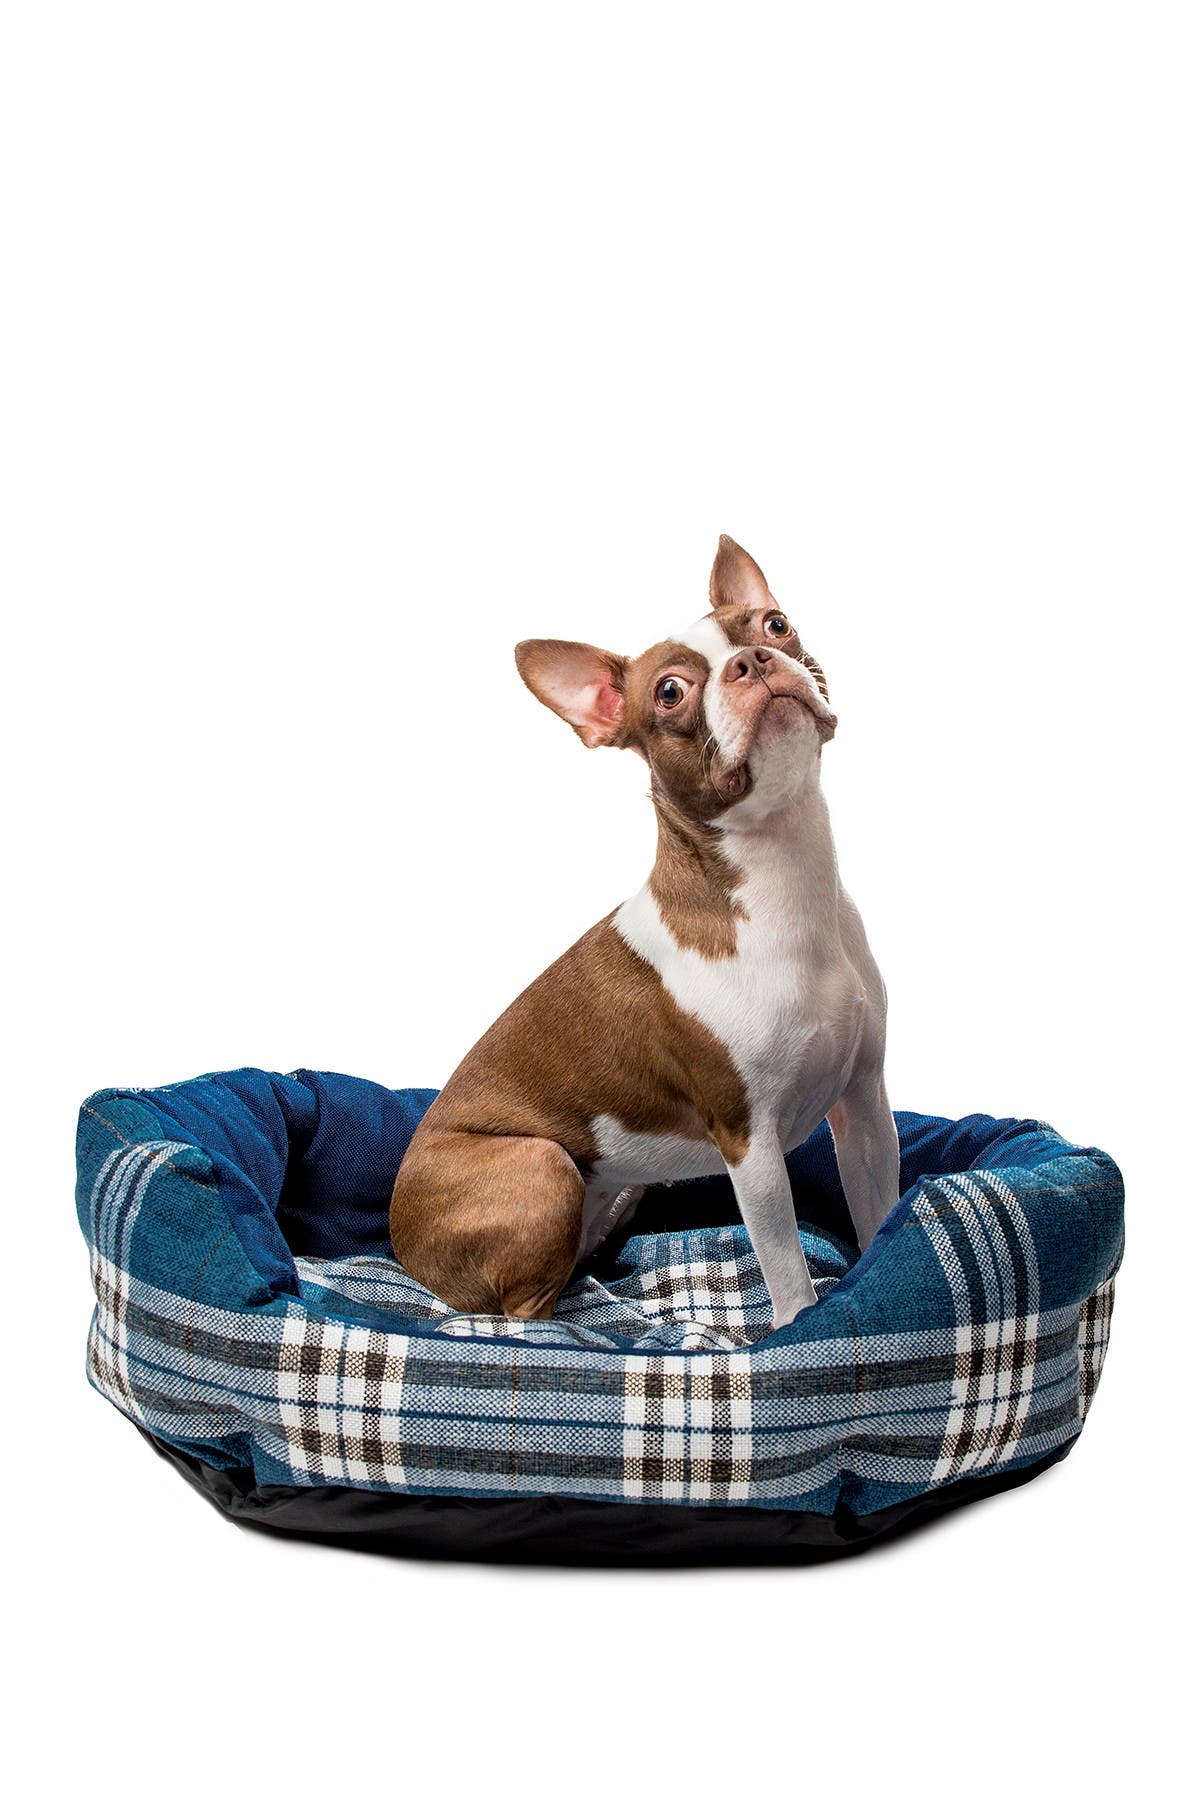 Duck River Textile Hadley Rounded Pet Bed In Denim